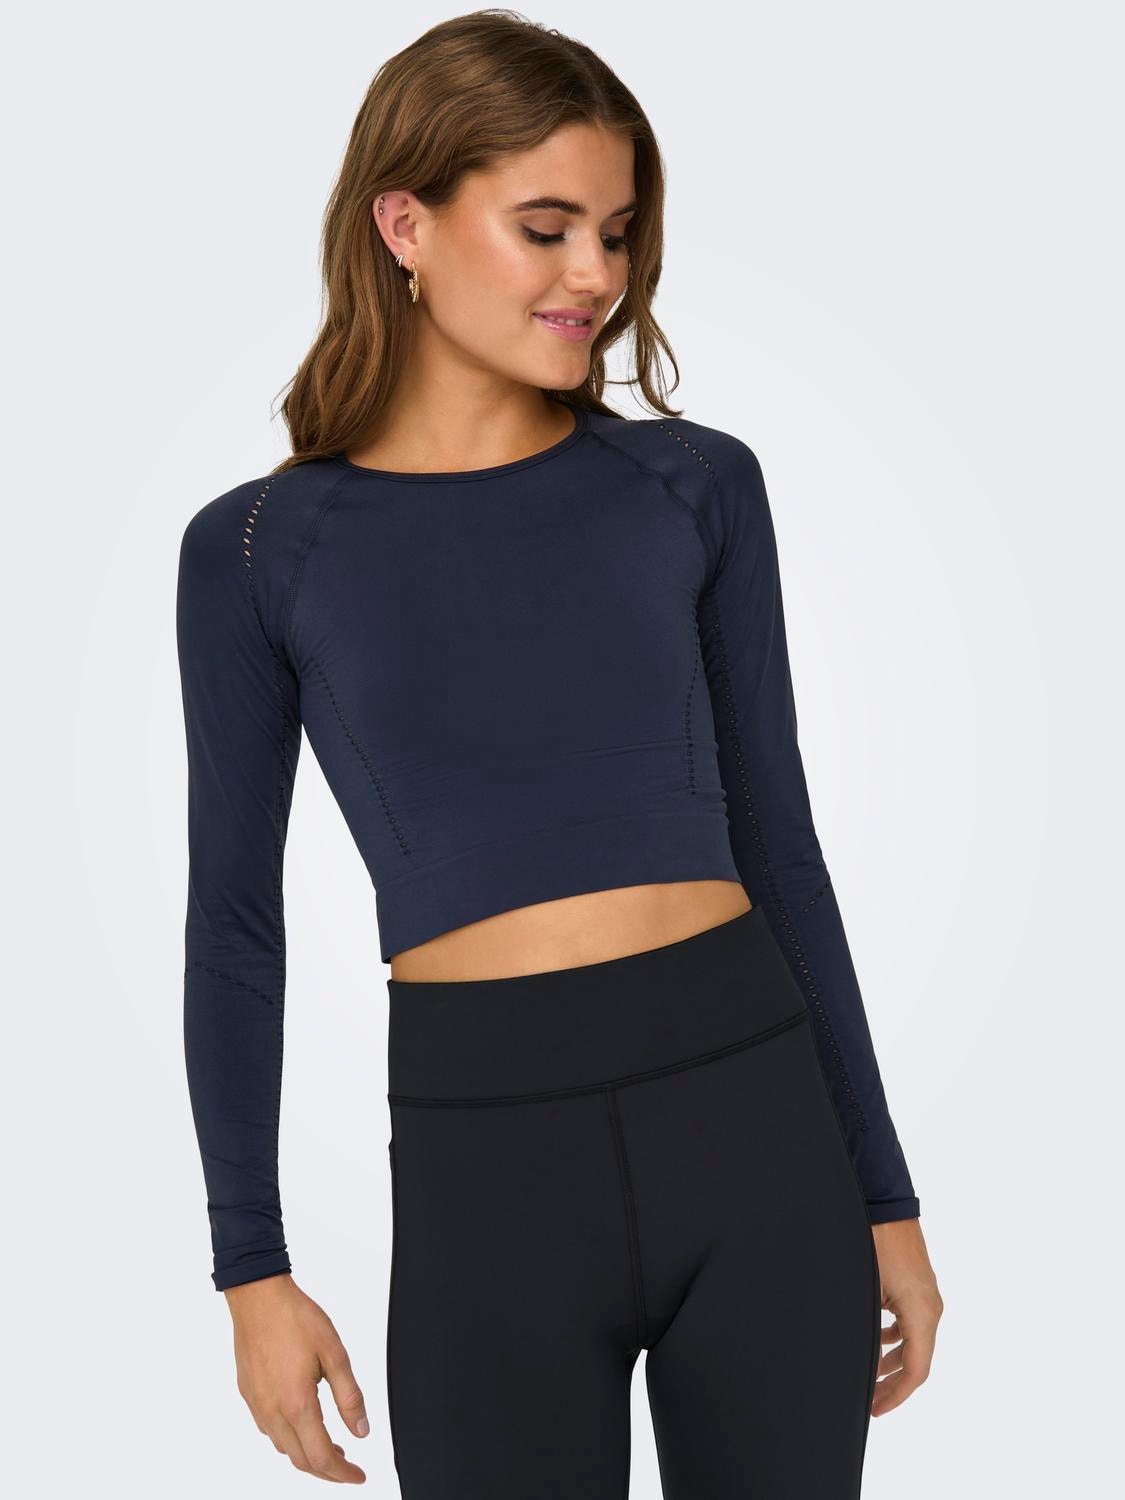 ONLY Tight fit O-hals Top -Blue Nights - 15305971